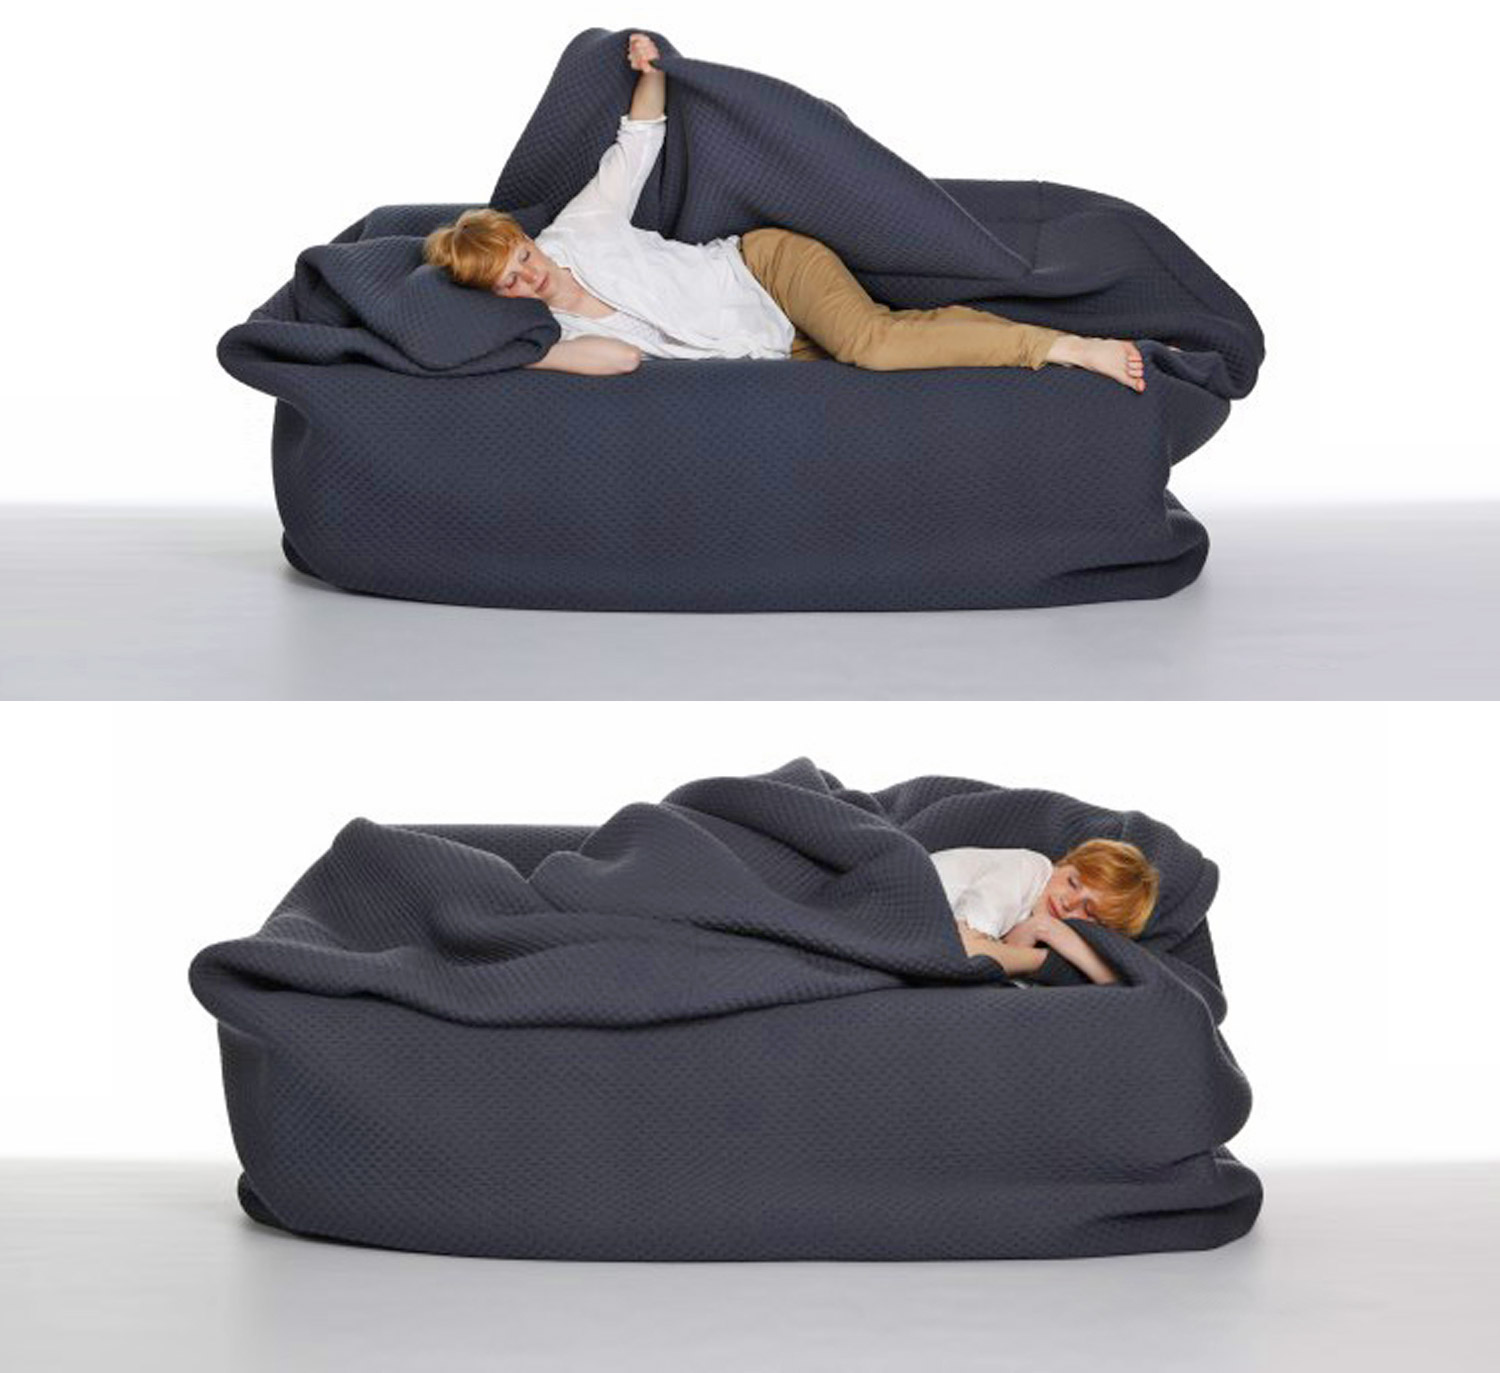 A Bean Bag Bed With Built-in Blanket 